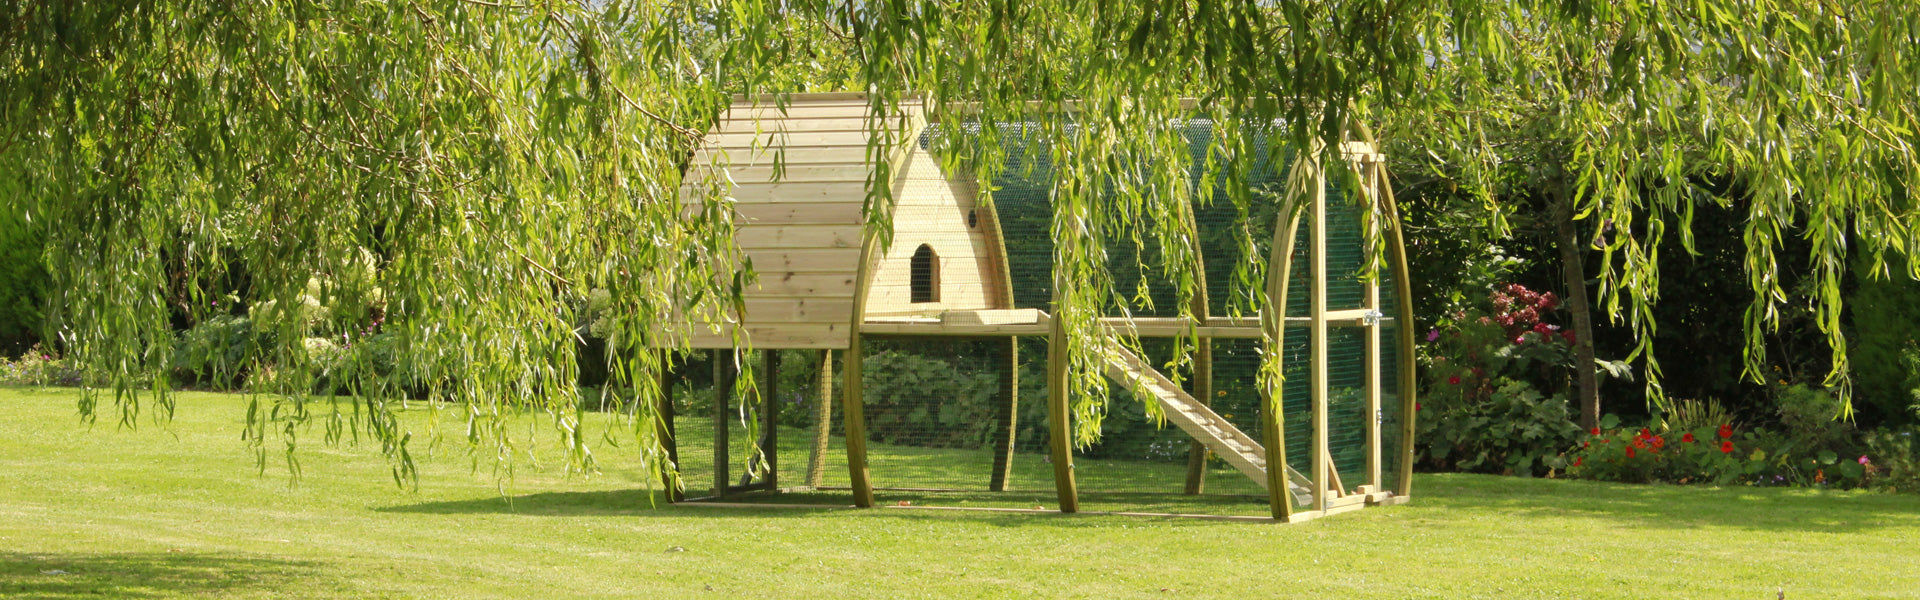 Arched Rabbit House by Framebow